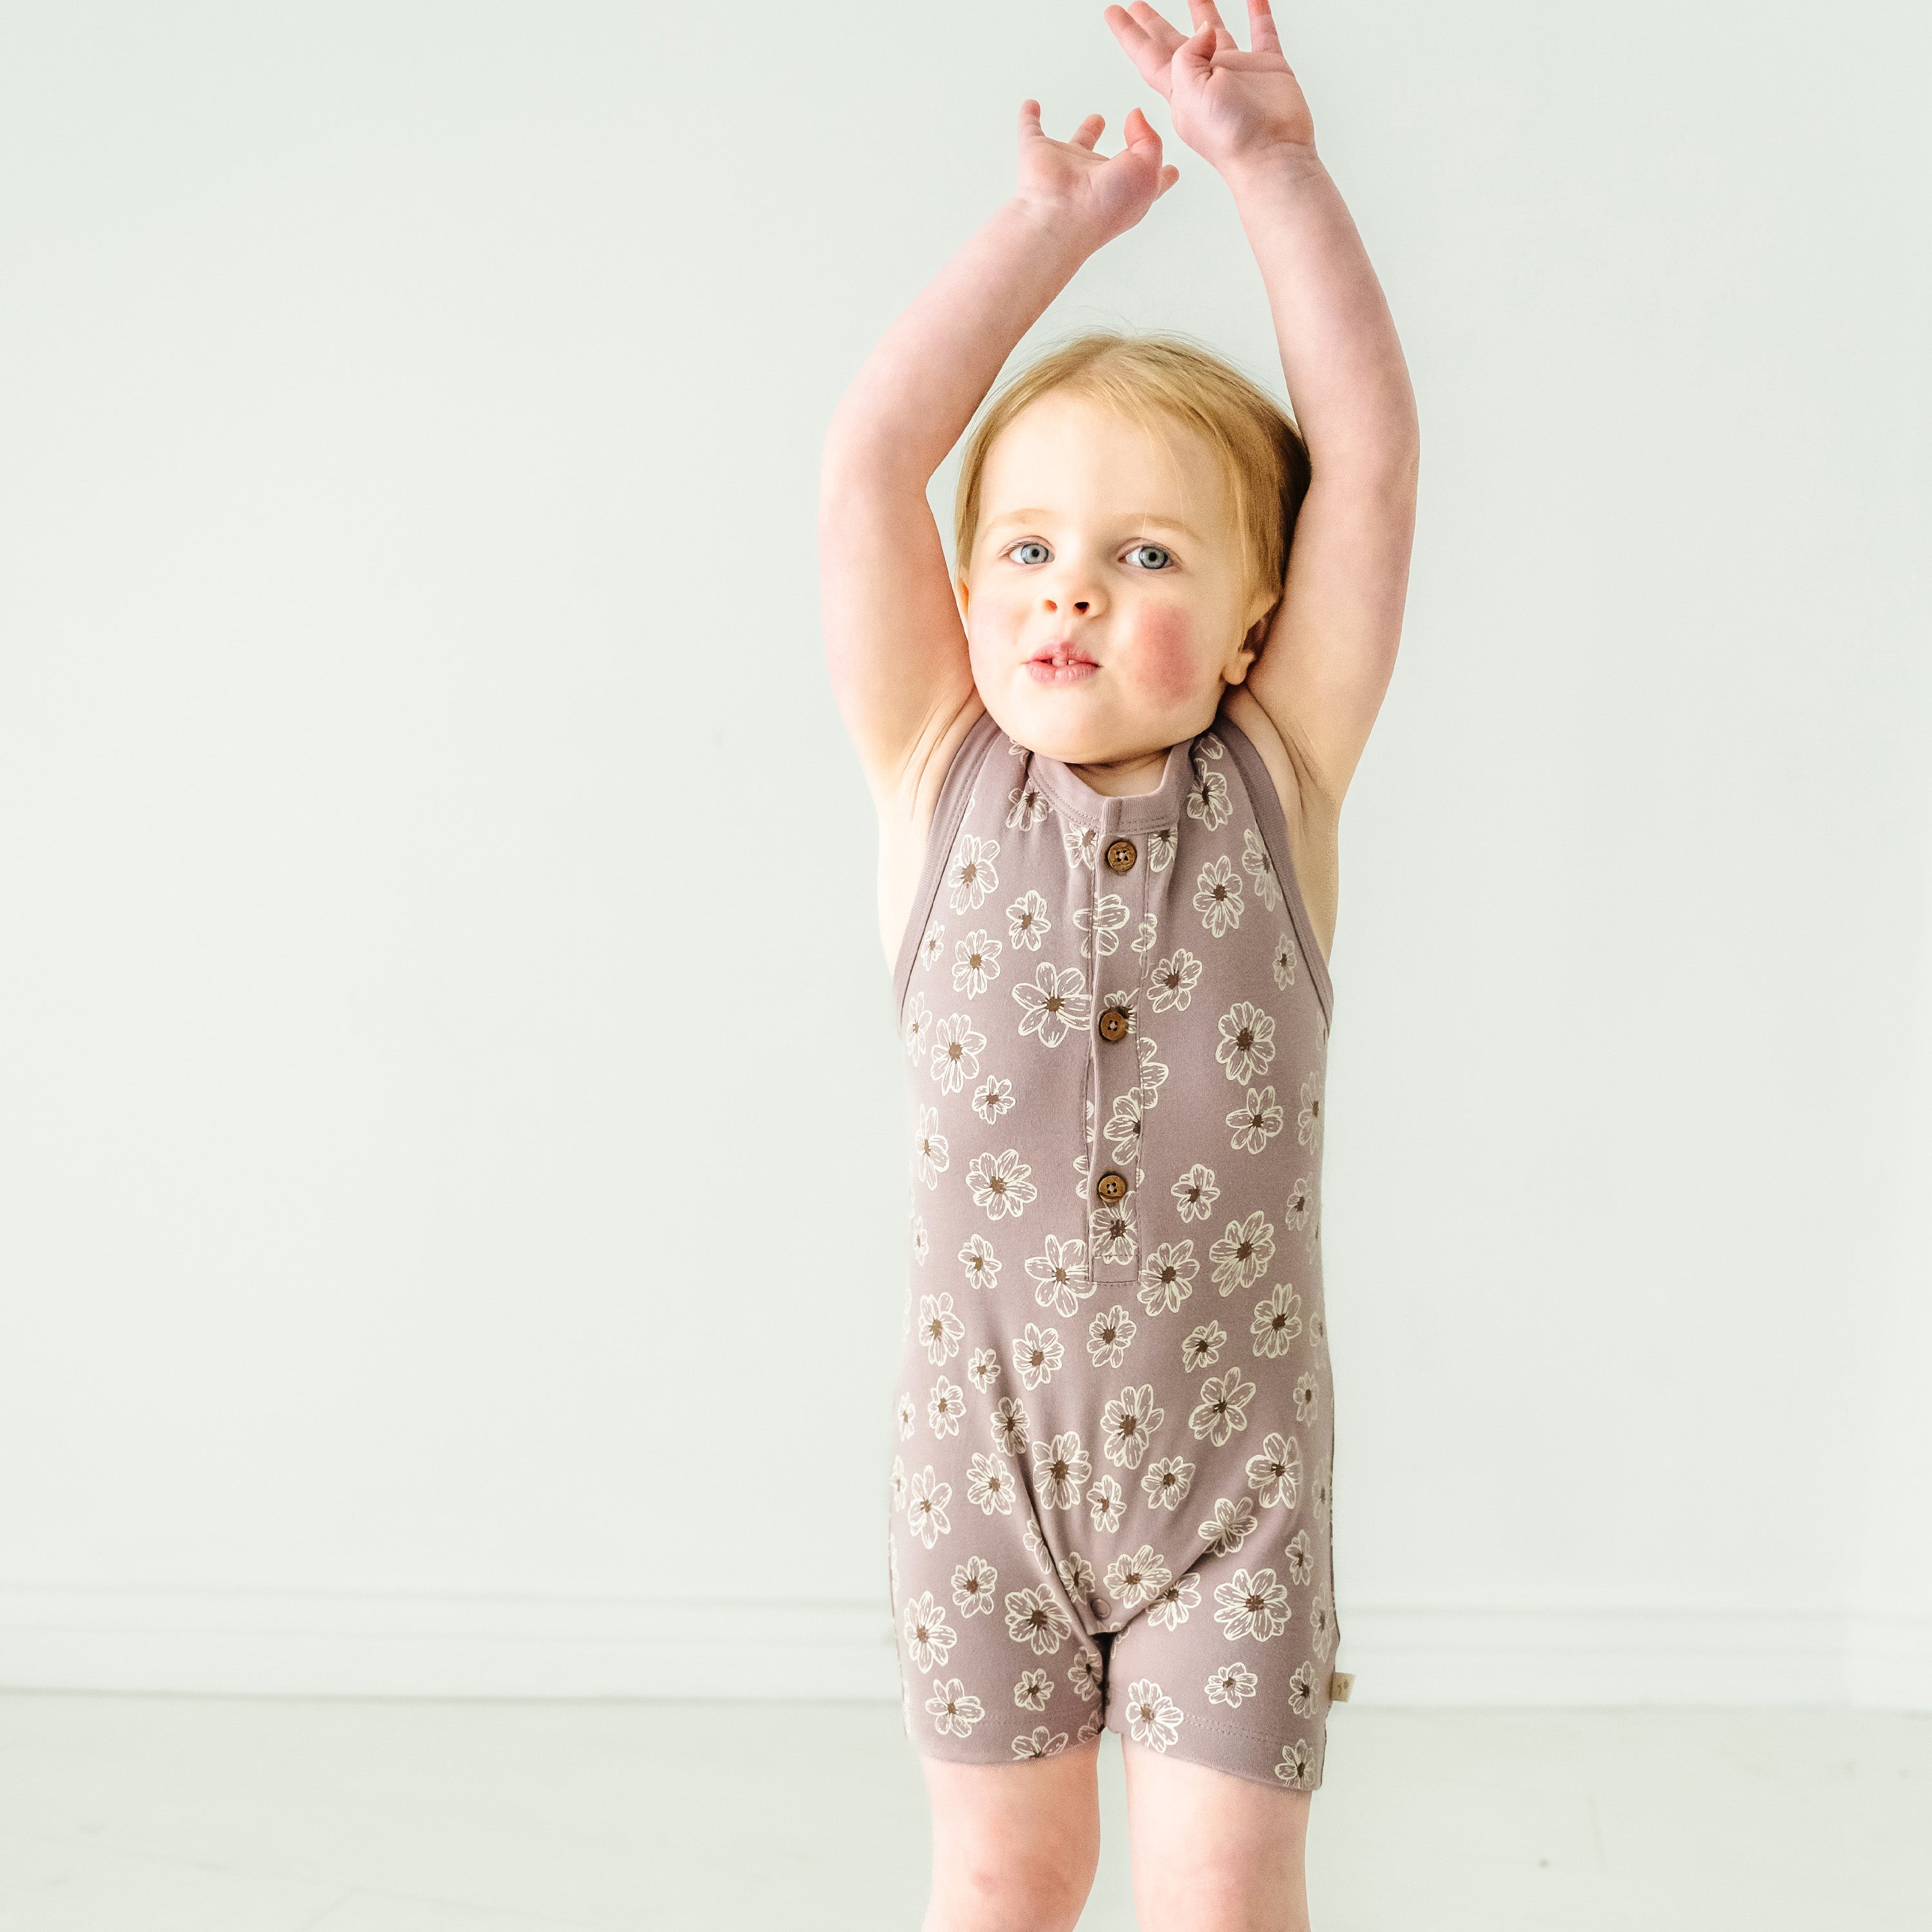 A baby in an Organic Sleeveless Short Romper - Daisies from Makemake Organics happily reaching up with both arms against a plain light background.